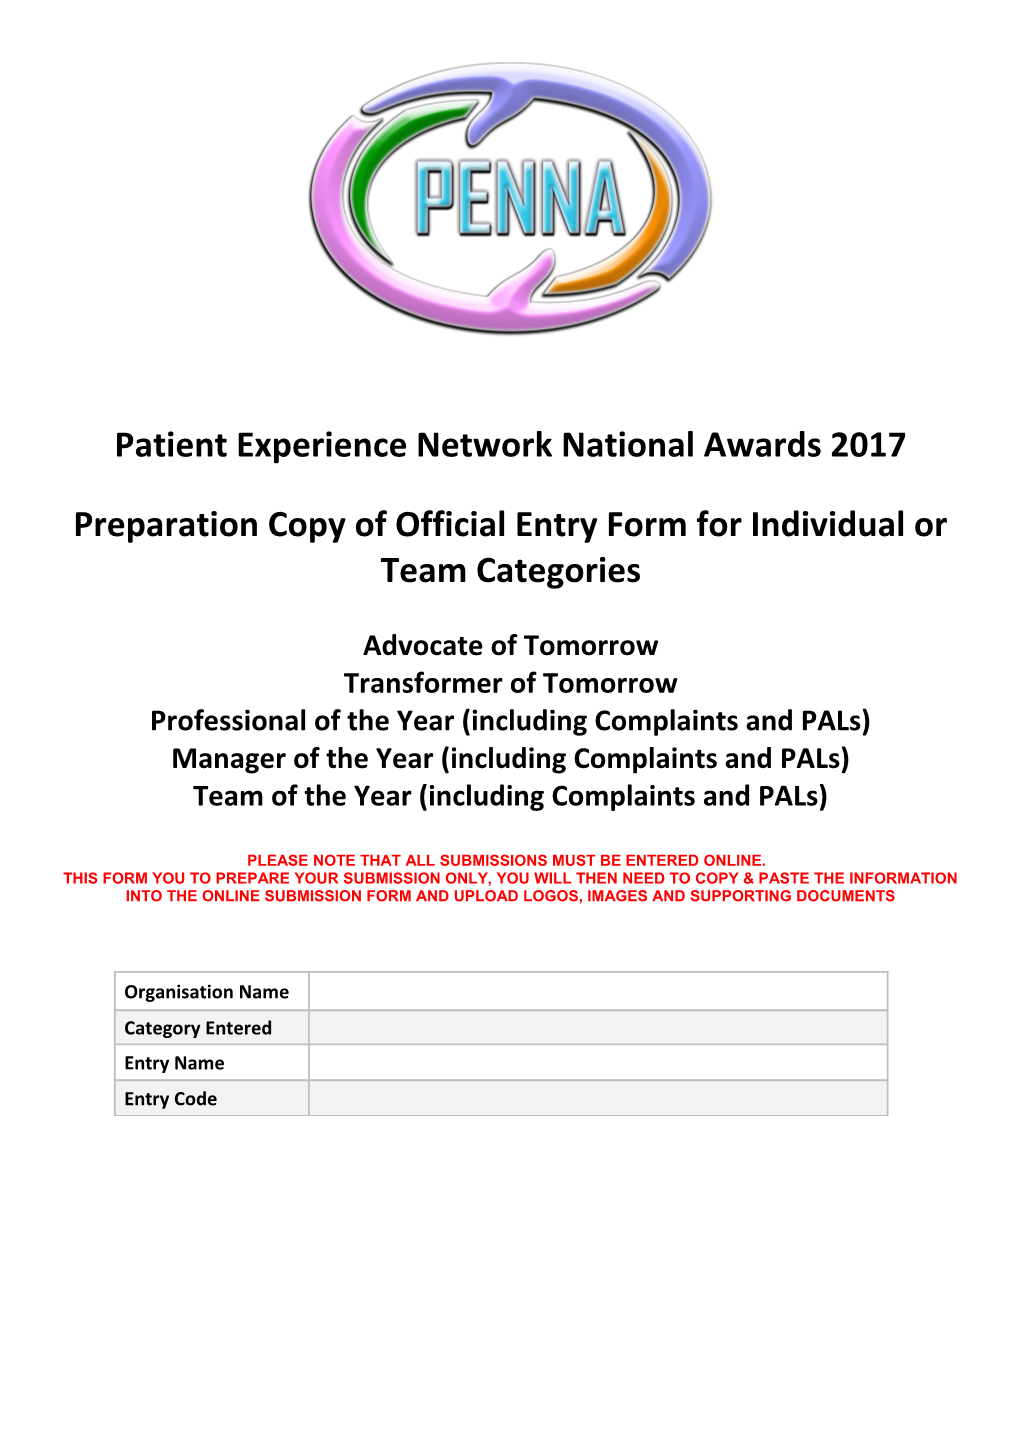 Patient Experience Network National Awards 2017